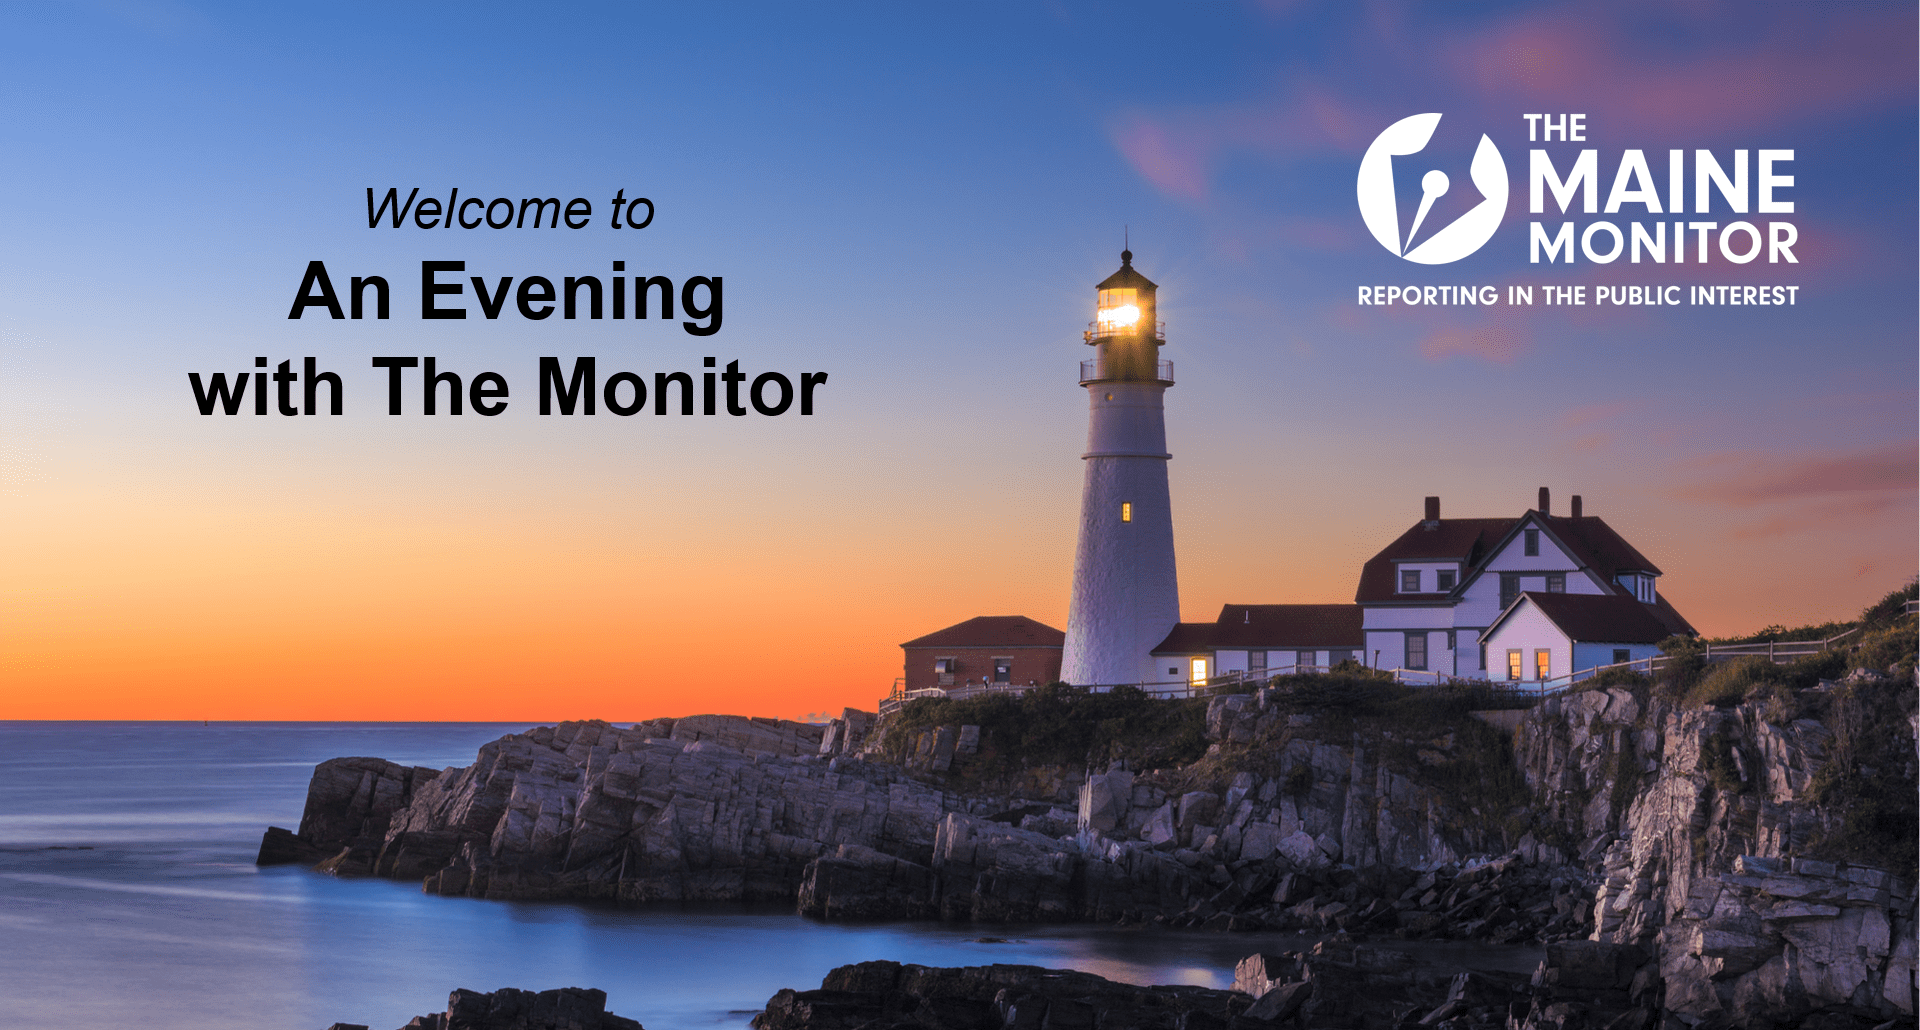 Catch our video: ‘An Evening with The Maine Monitor’